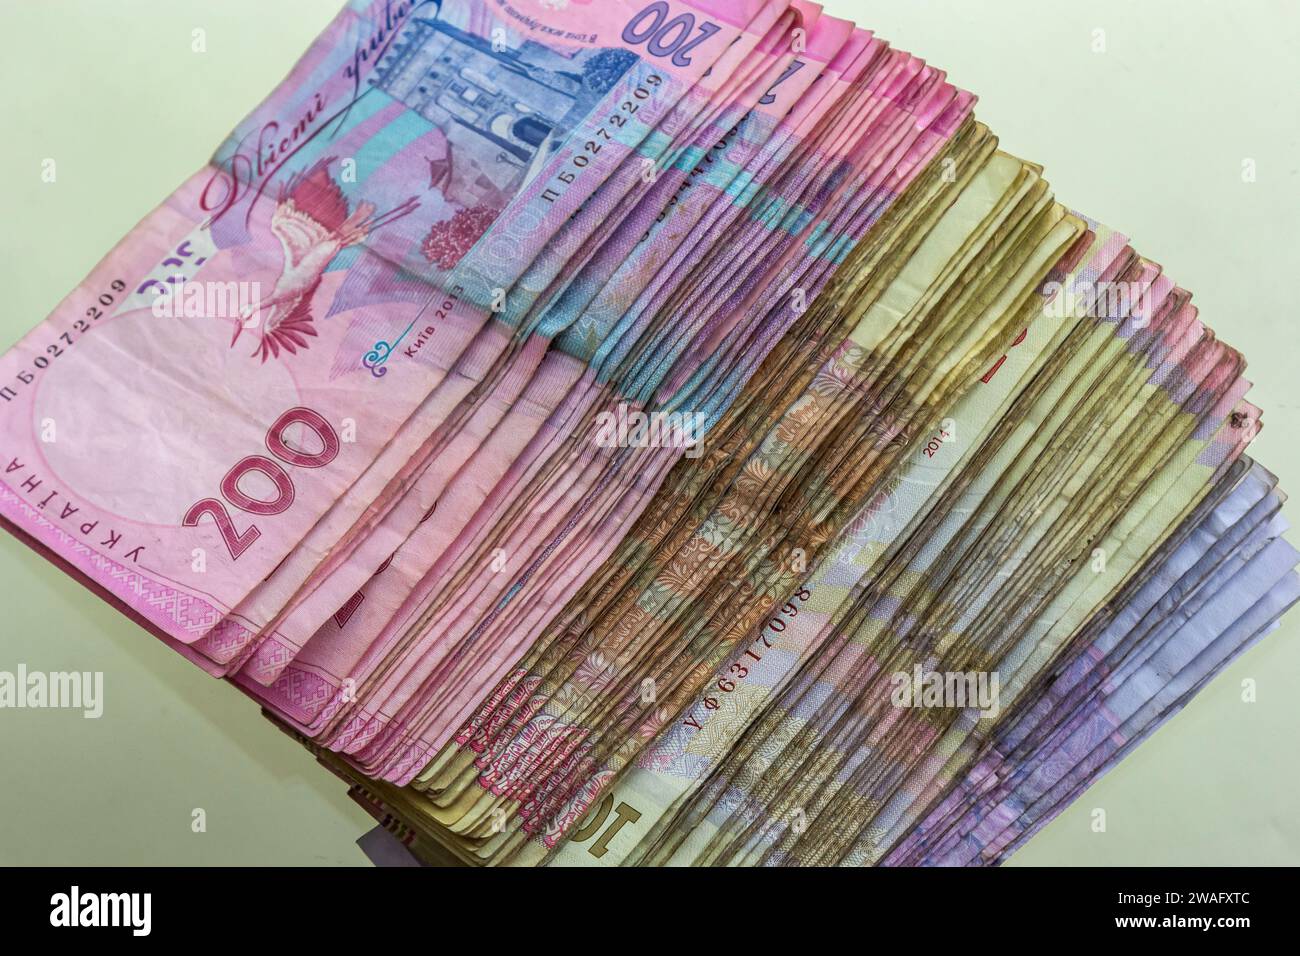 Ukrainian paper money is laid out on a blue background. 200 hryvnia banknotes. Stock Photo